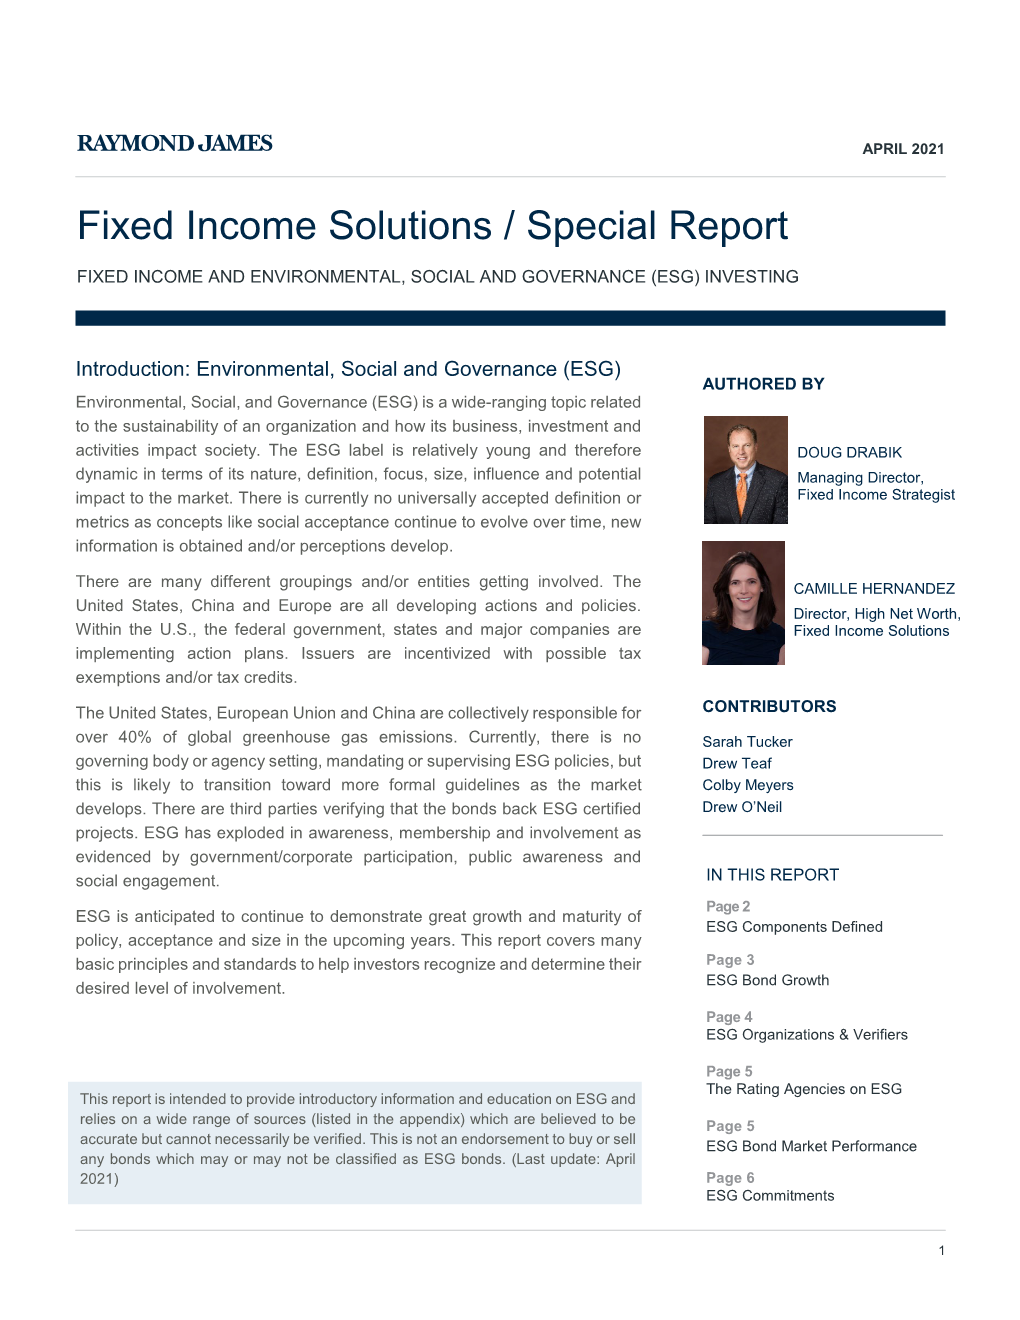 Fixed Income Solutions / Special Report FIXED INCOME and ENVIRONMENTAL, SOCIAL and GOVERNANCE (ESG) INVESTING